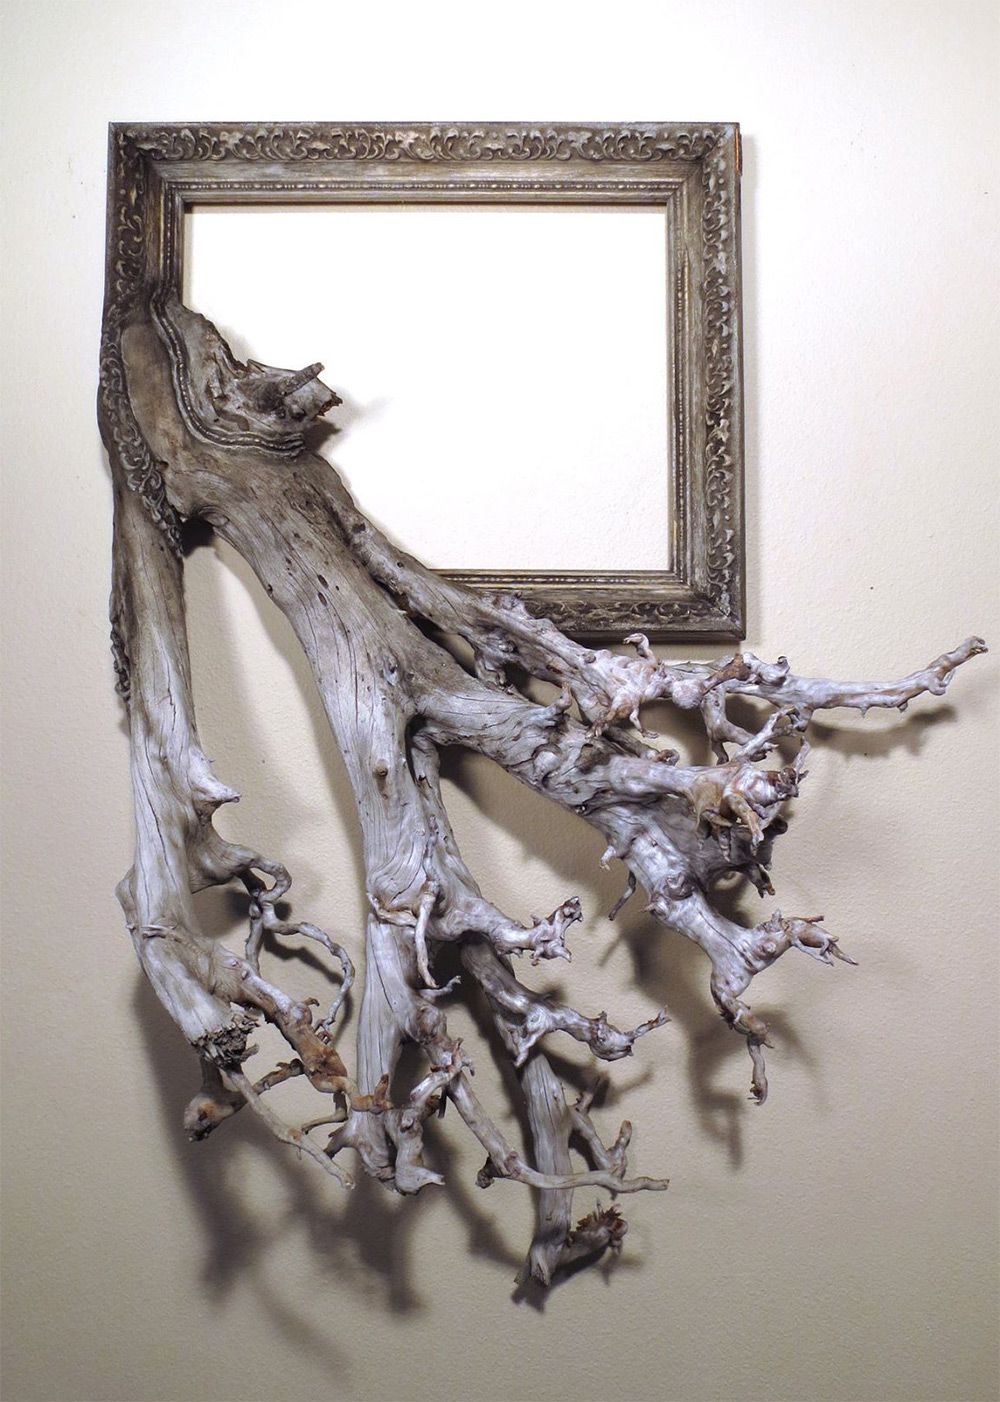 Tree Roots And Branches Fused With Ornate Picture Frames By Darryl Cox 10